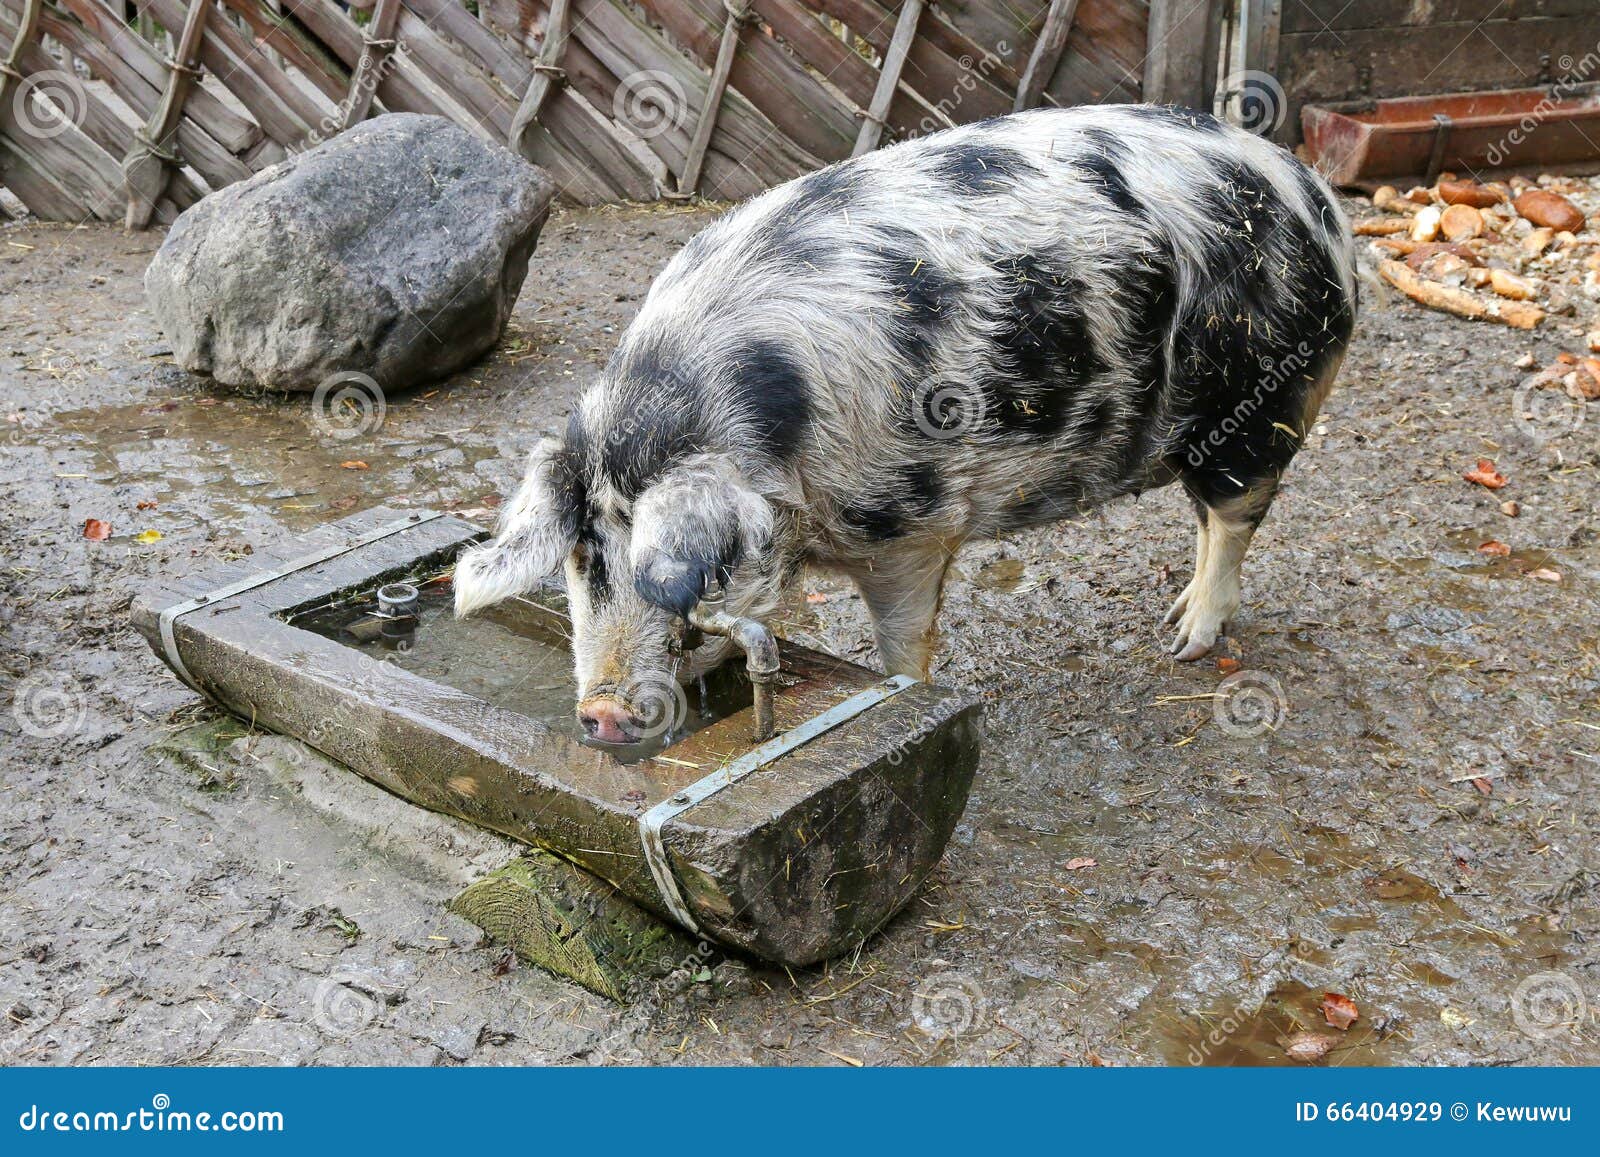 the turopolje pig, european white sow pig with black spots drink